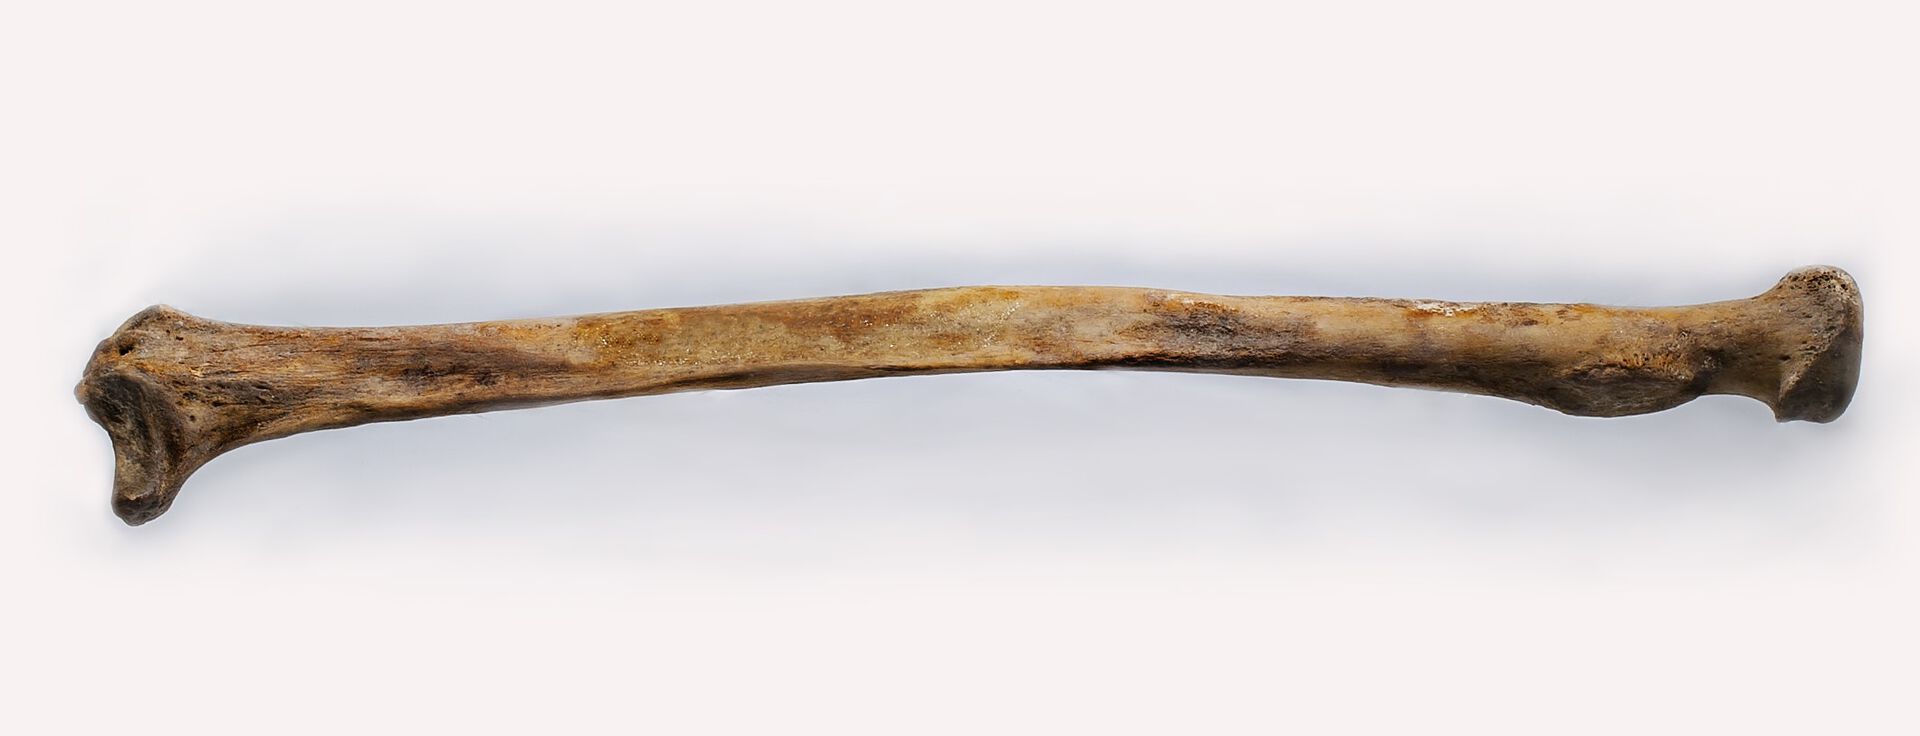 An ulna bone from the collection